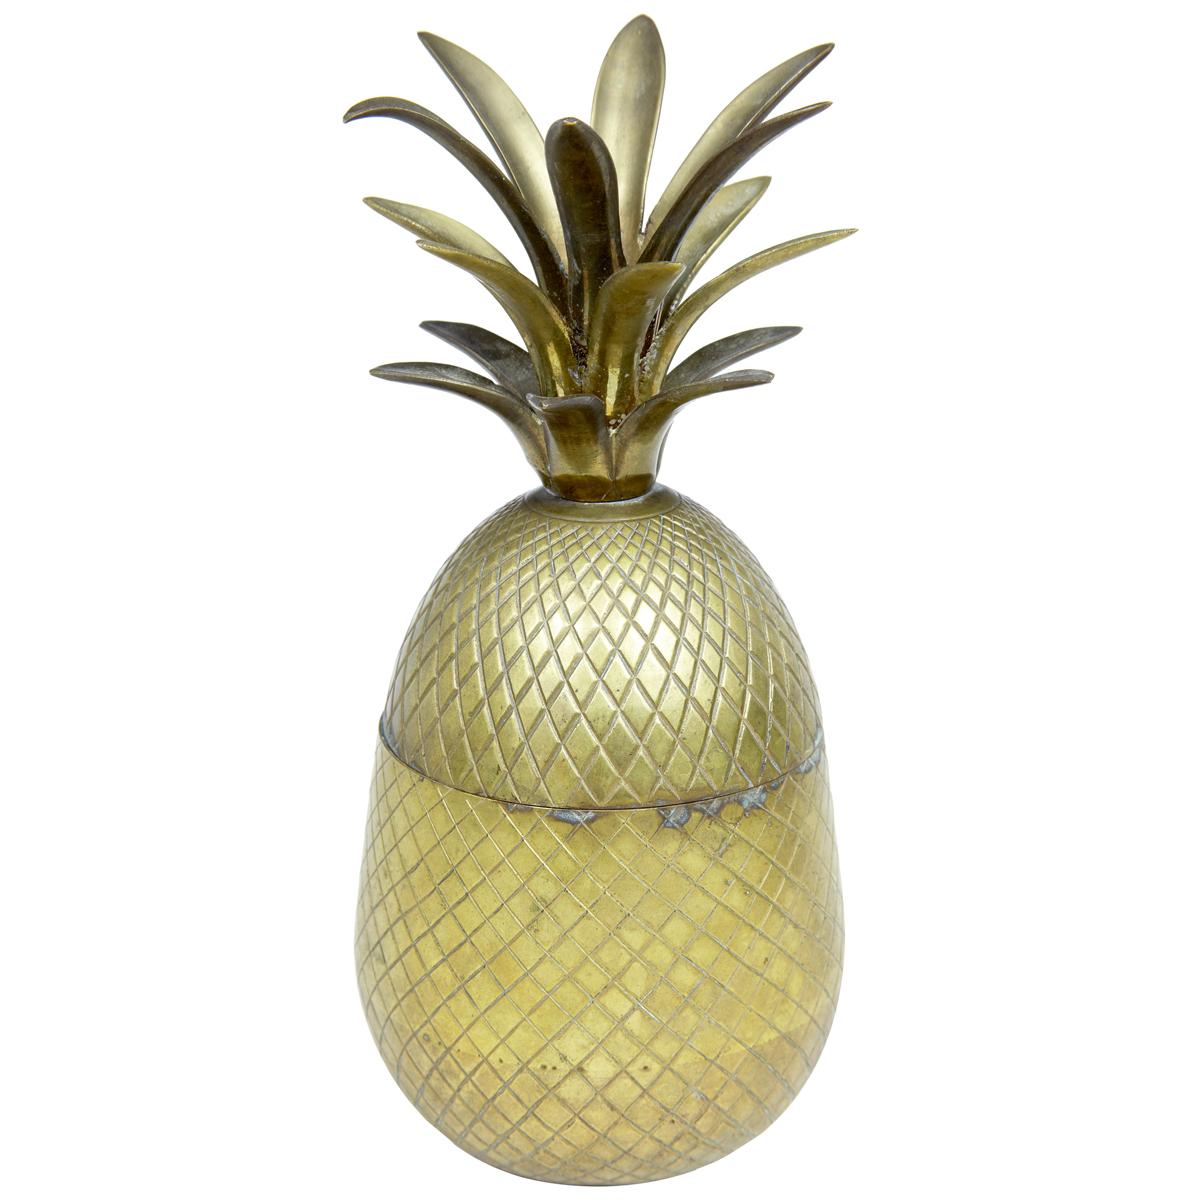 Early 20th Century Chiselled Brass and Gilt Pineapple Box Caddy